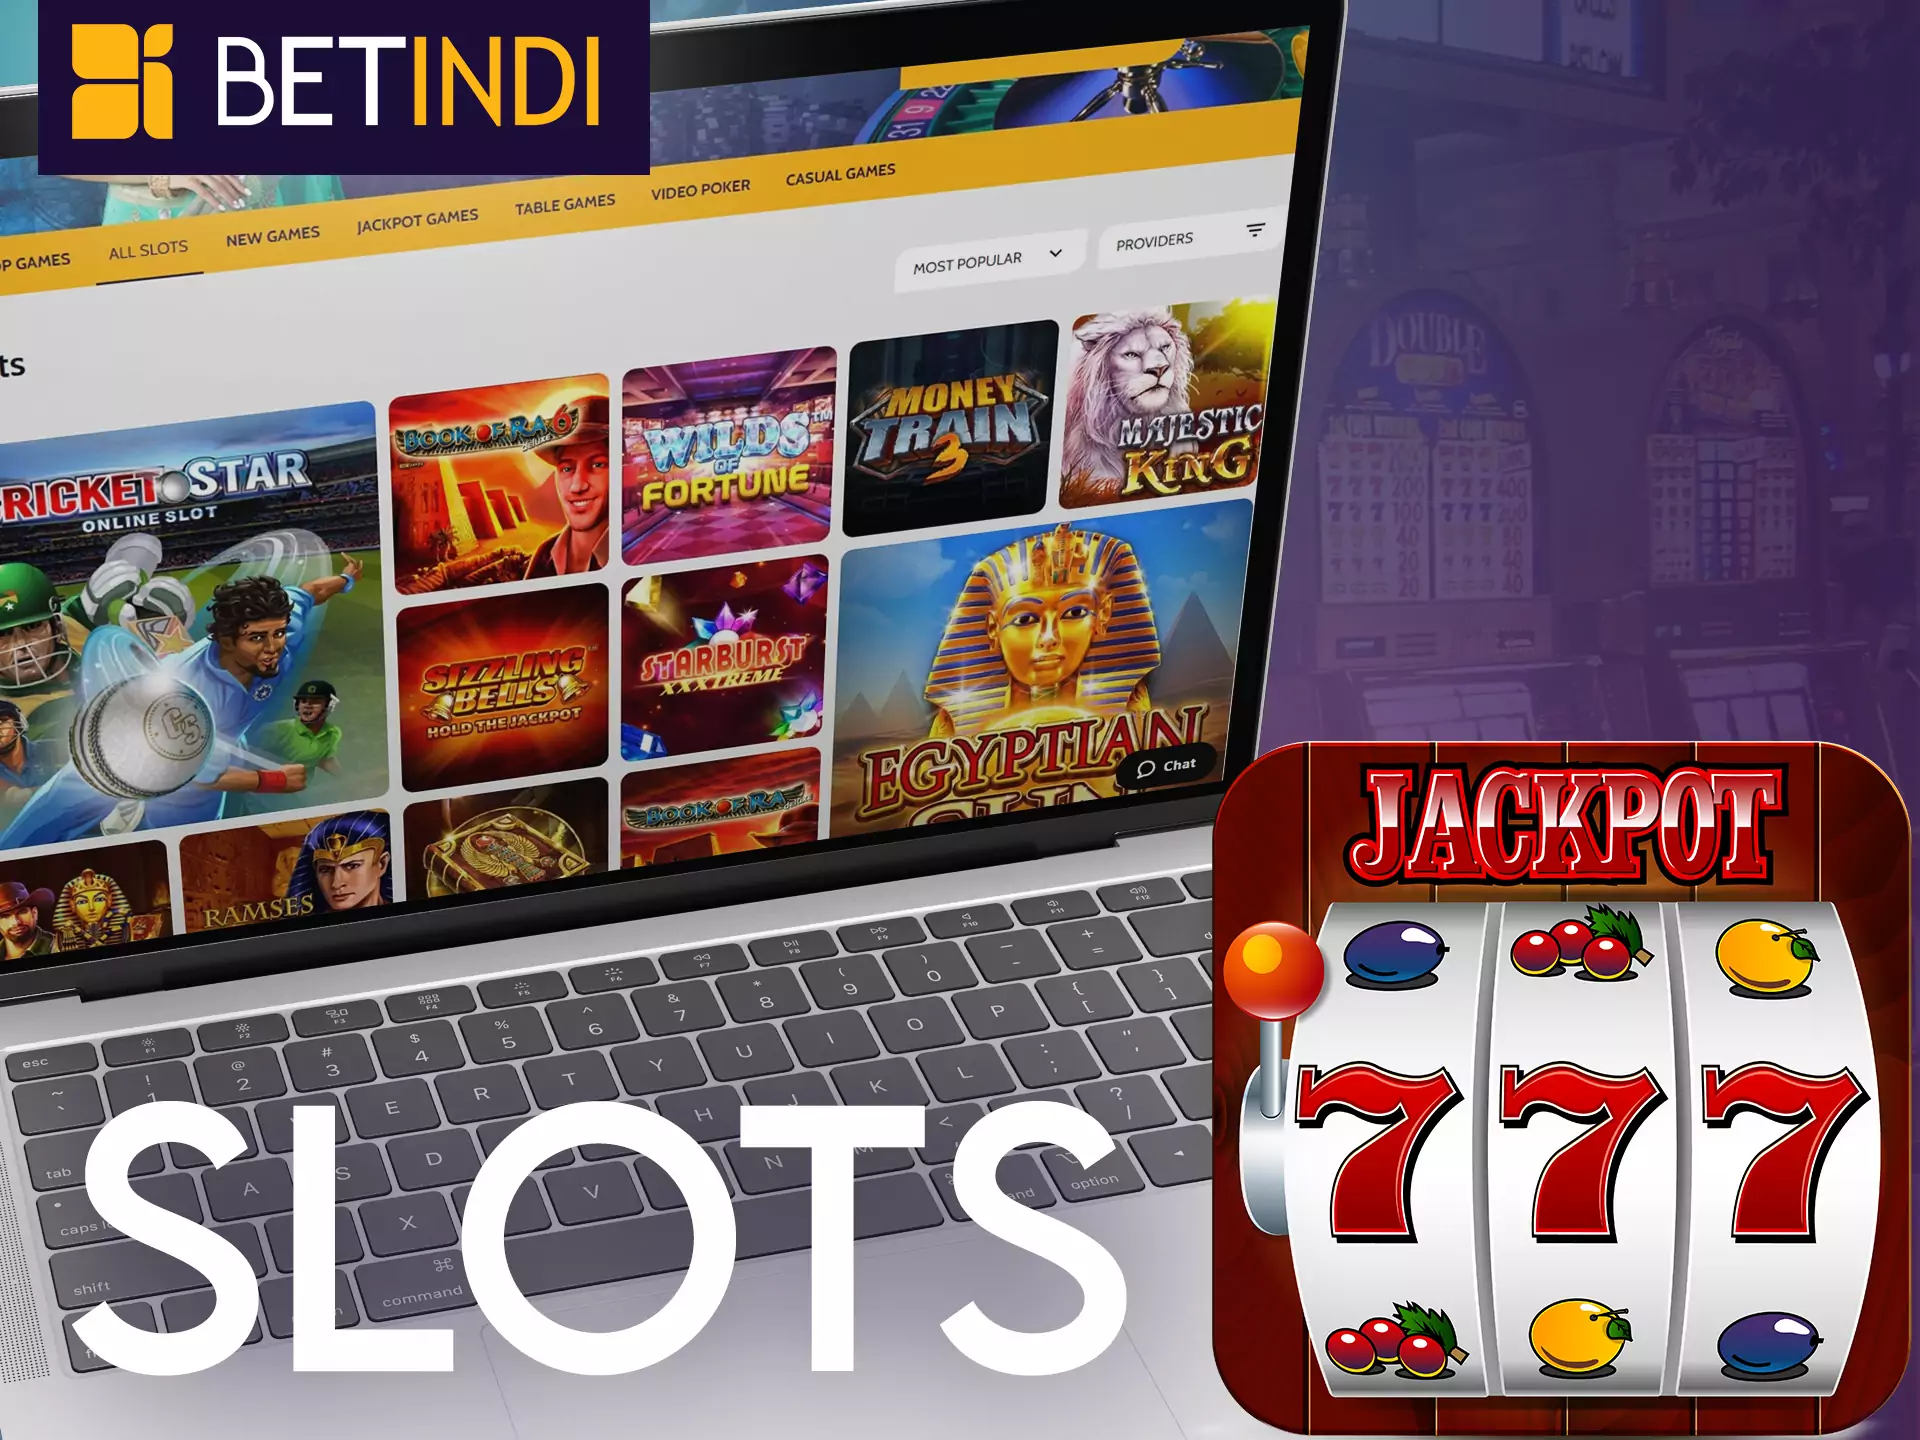 Play slots at Betindi Casino, try your luck.